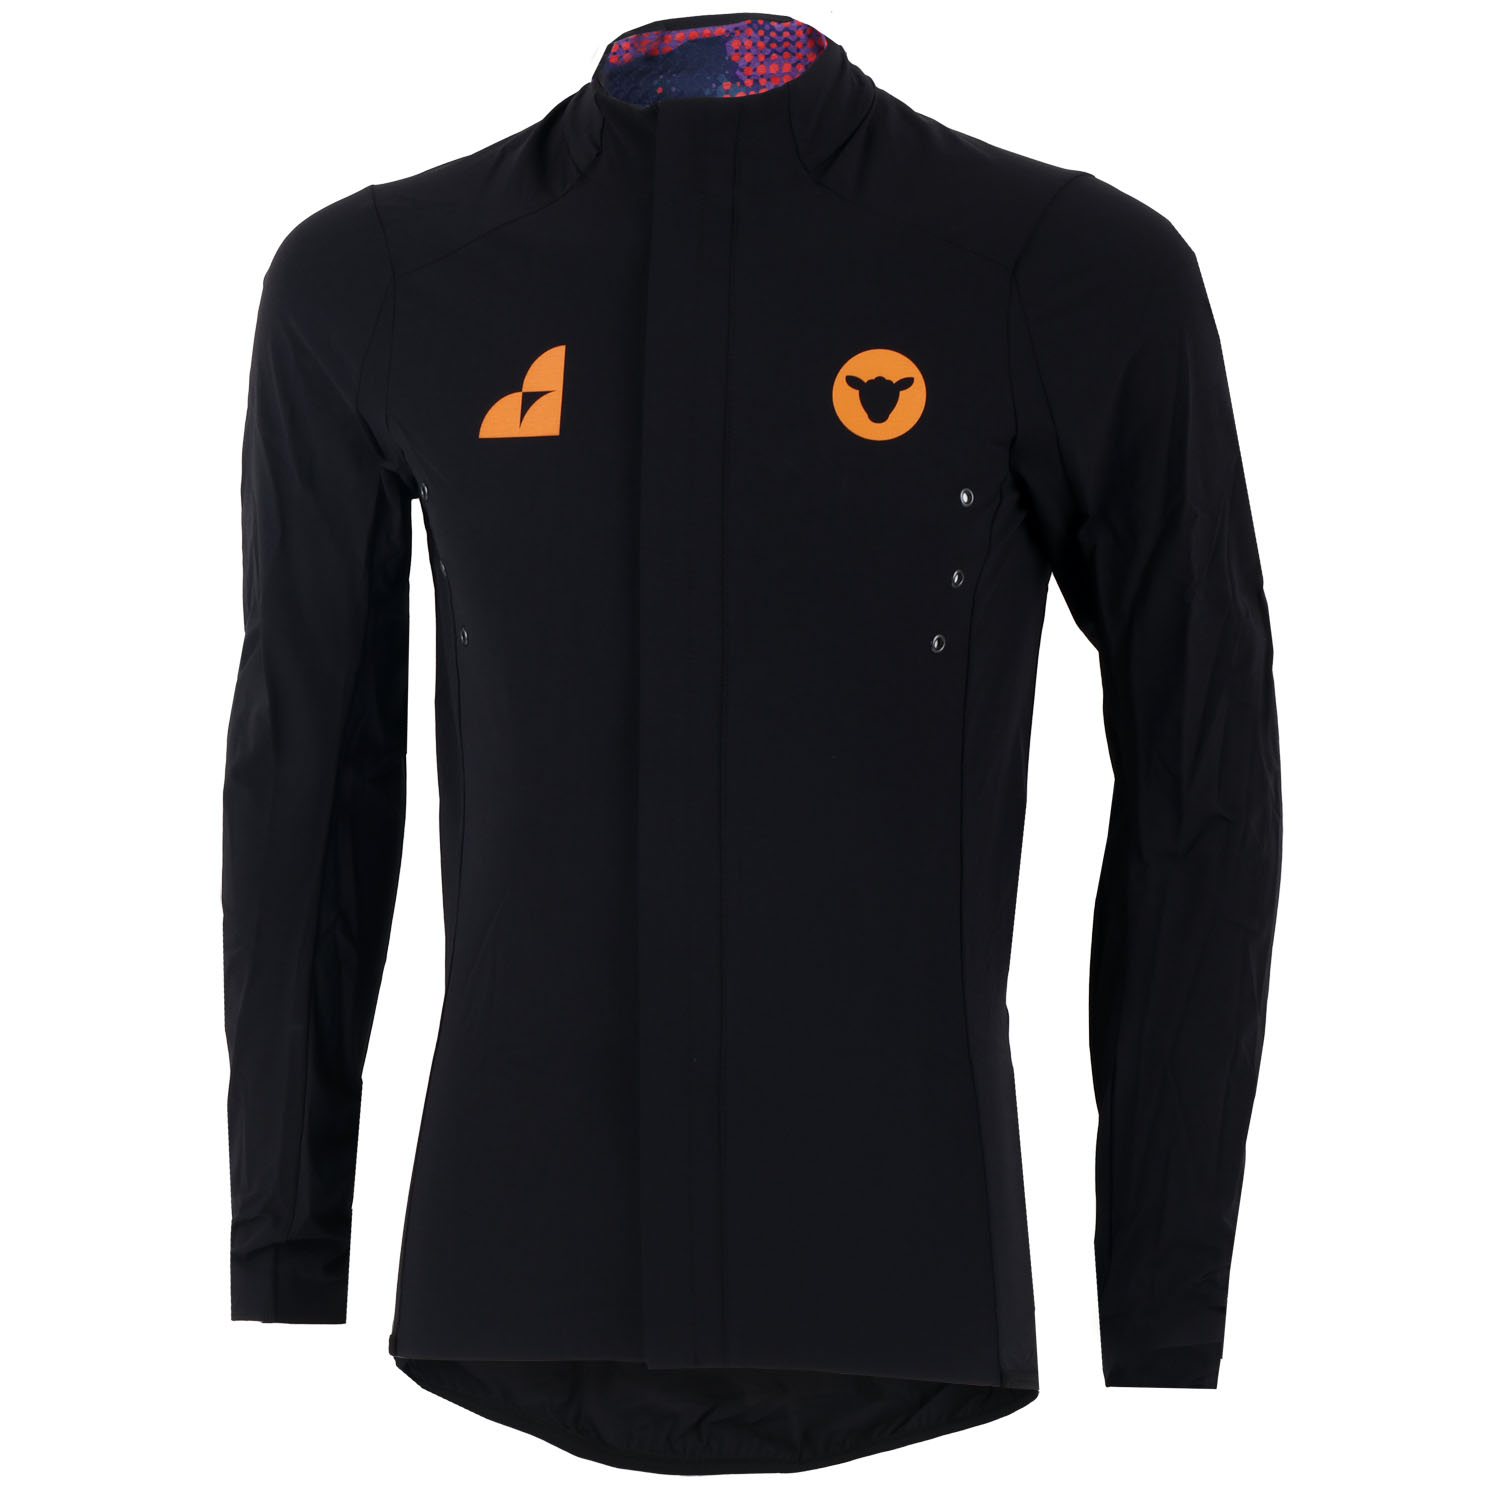 Image of Black Sheep Cycling LTD Queens Micro Jacket - Spain